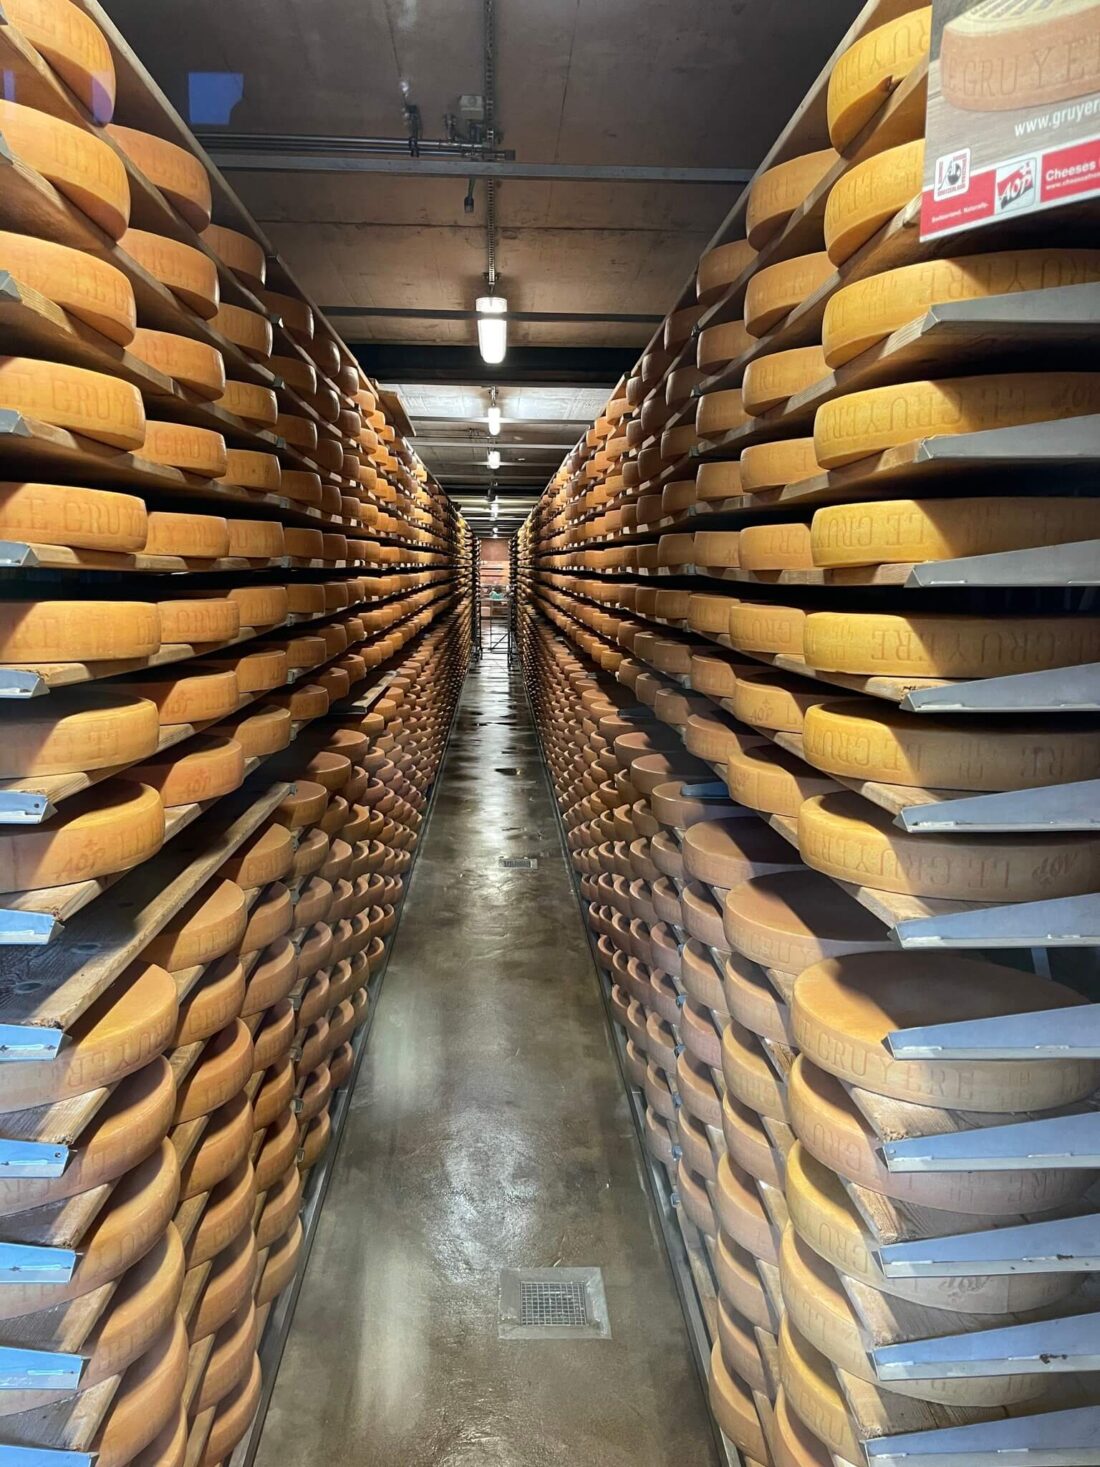 Shelves of cheese being aged in Gruyeres Switzerland